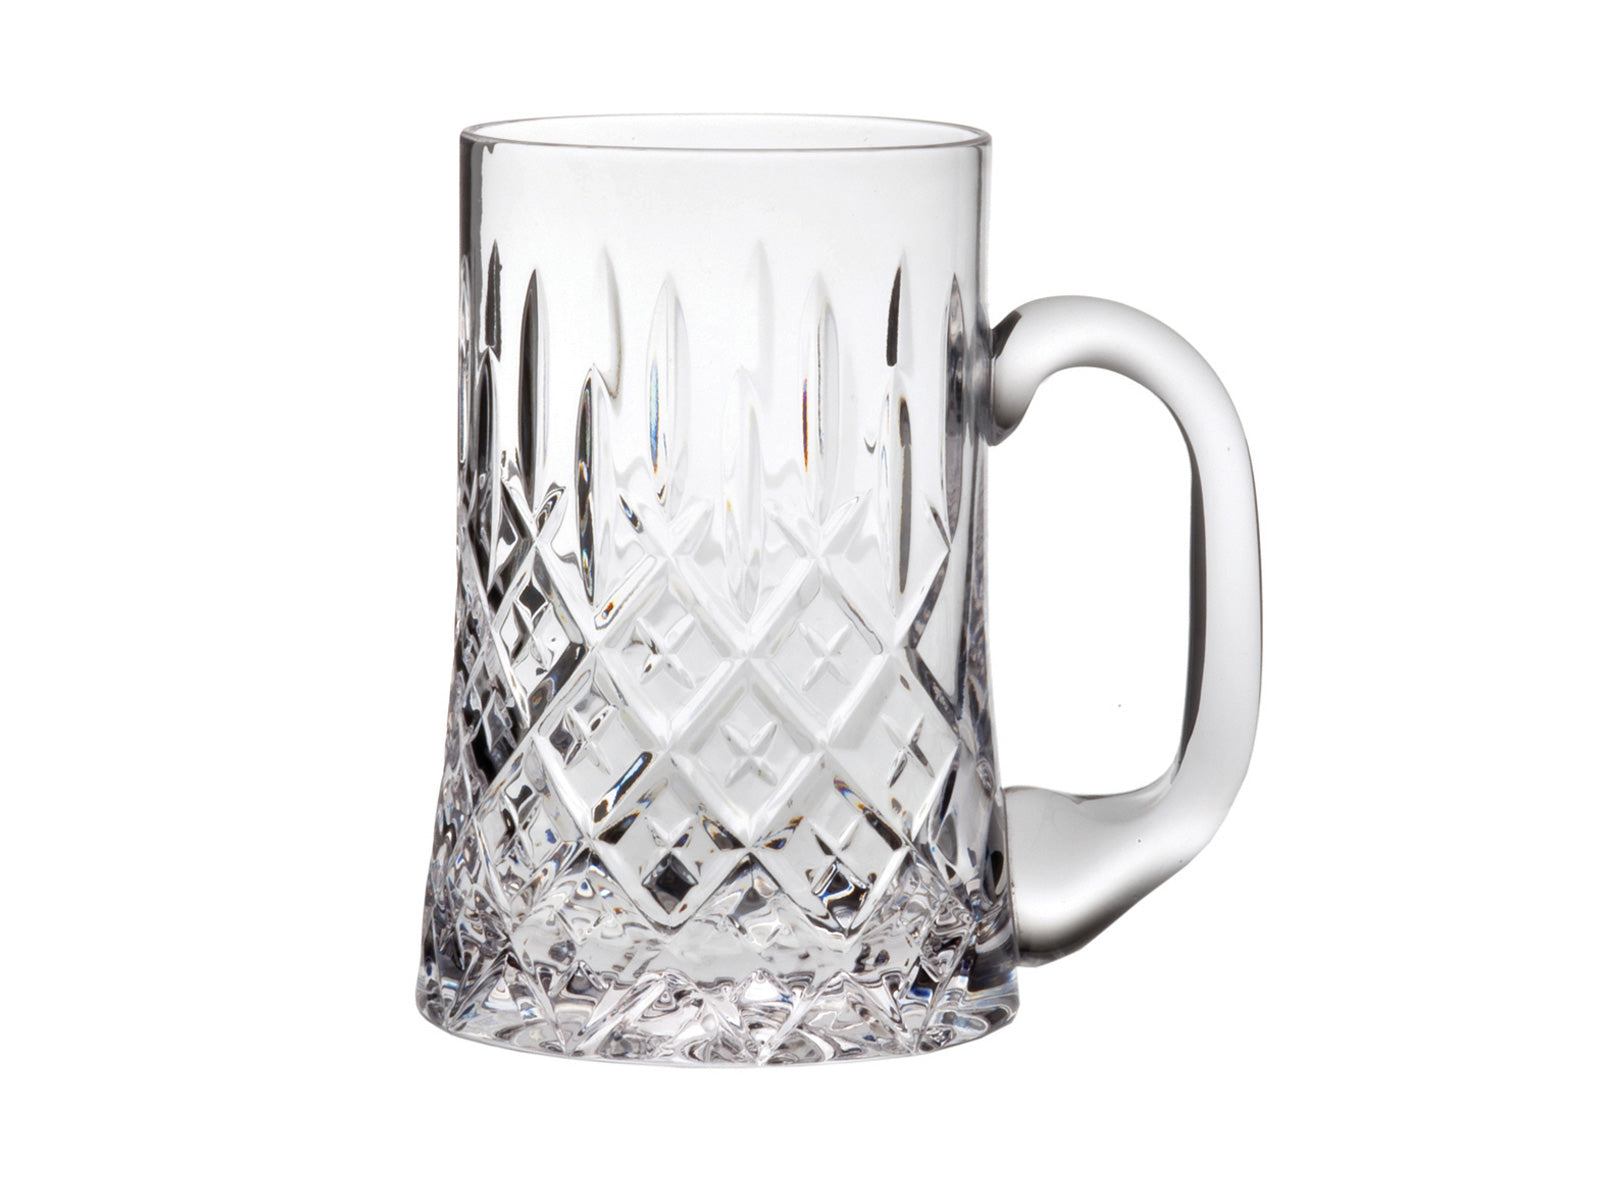 This Royal Scot Crystal London Tankard - Large has been hand-cut with the classic London design all around its body. This would be the perfect pint glass to serve up all your favourite ales, and has been crafted of the finest crystal to give it an elegant touch.